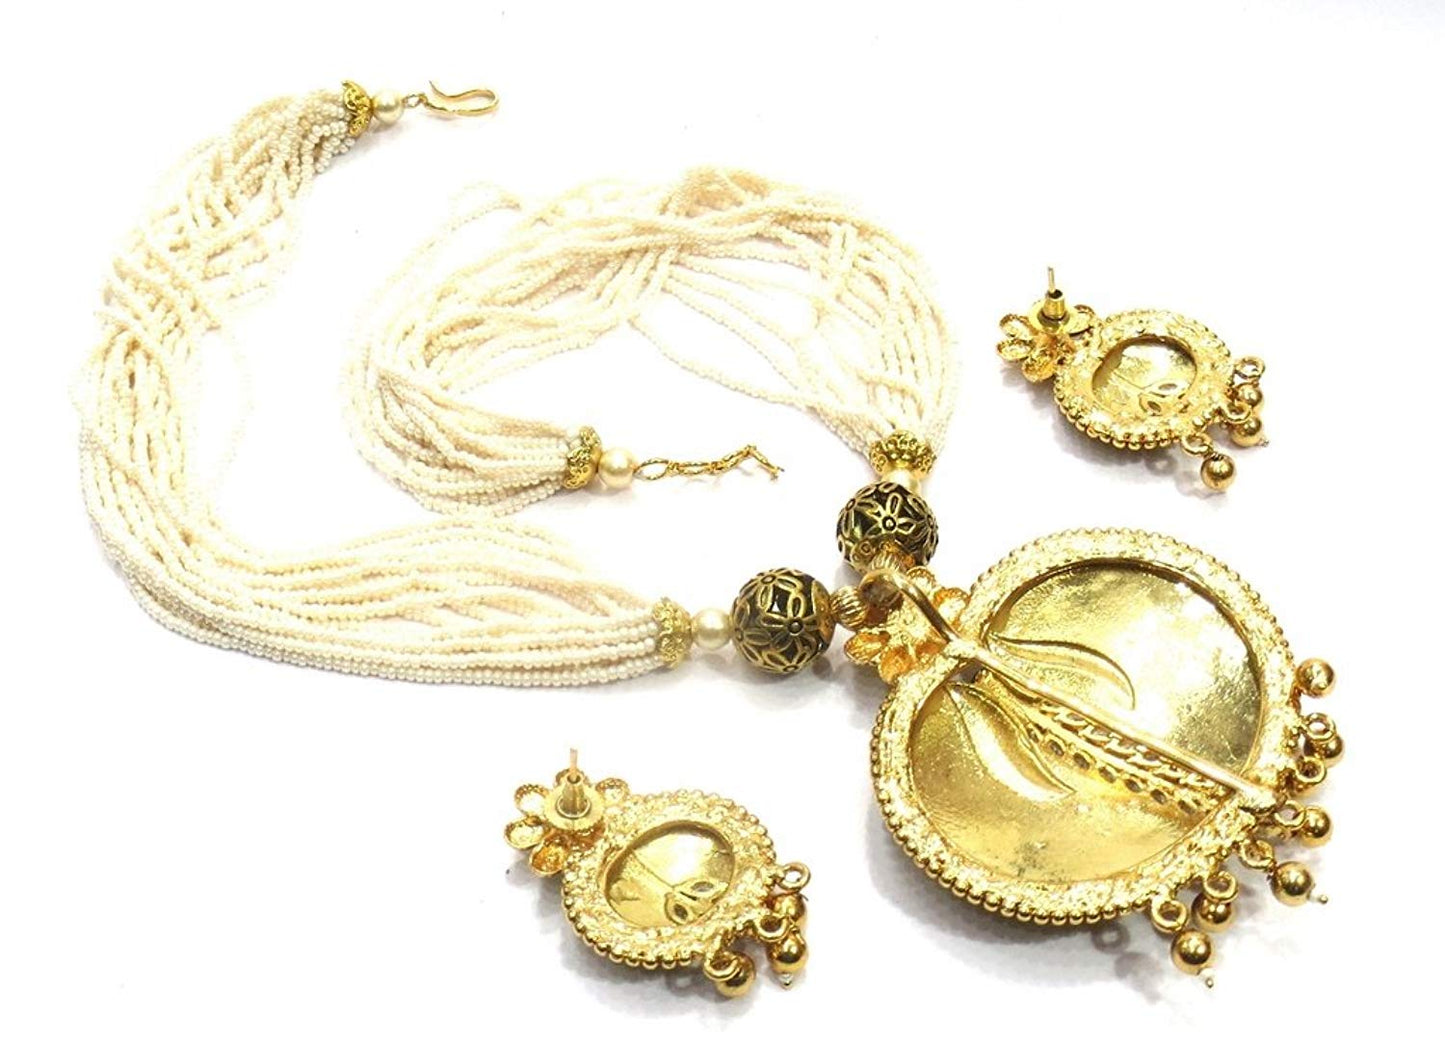 Jewelshingar Jewellery Fine Gold Plated Pendant Set For Women ( 36253-as-ps )